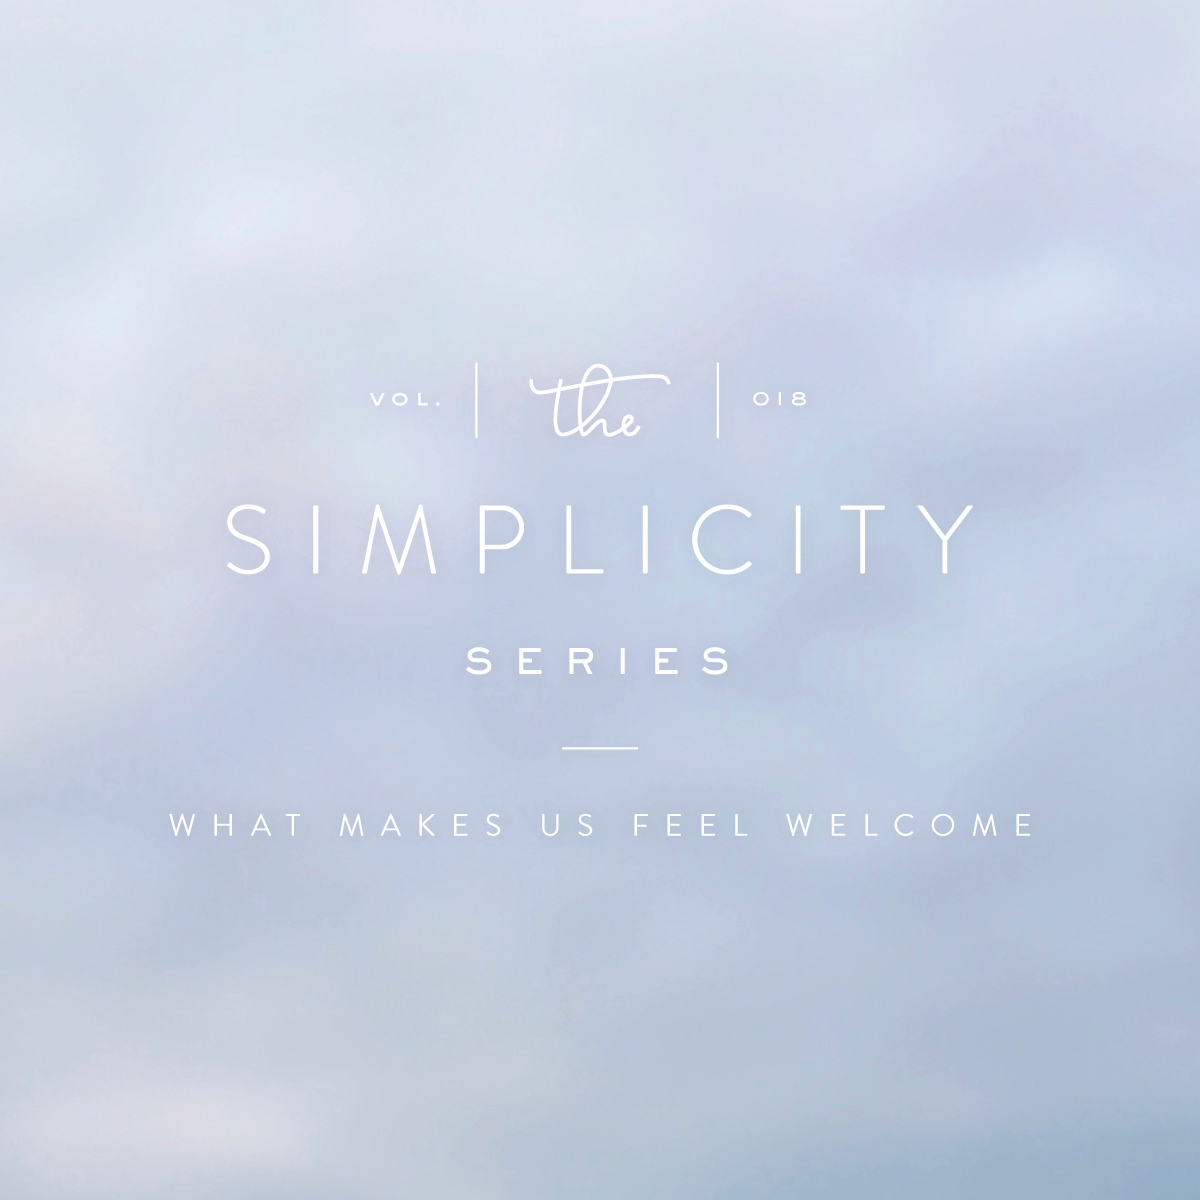 Simplified Hospitality: What Makes us Feel Welcome